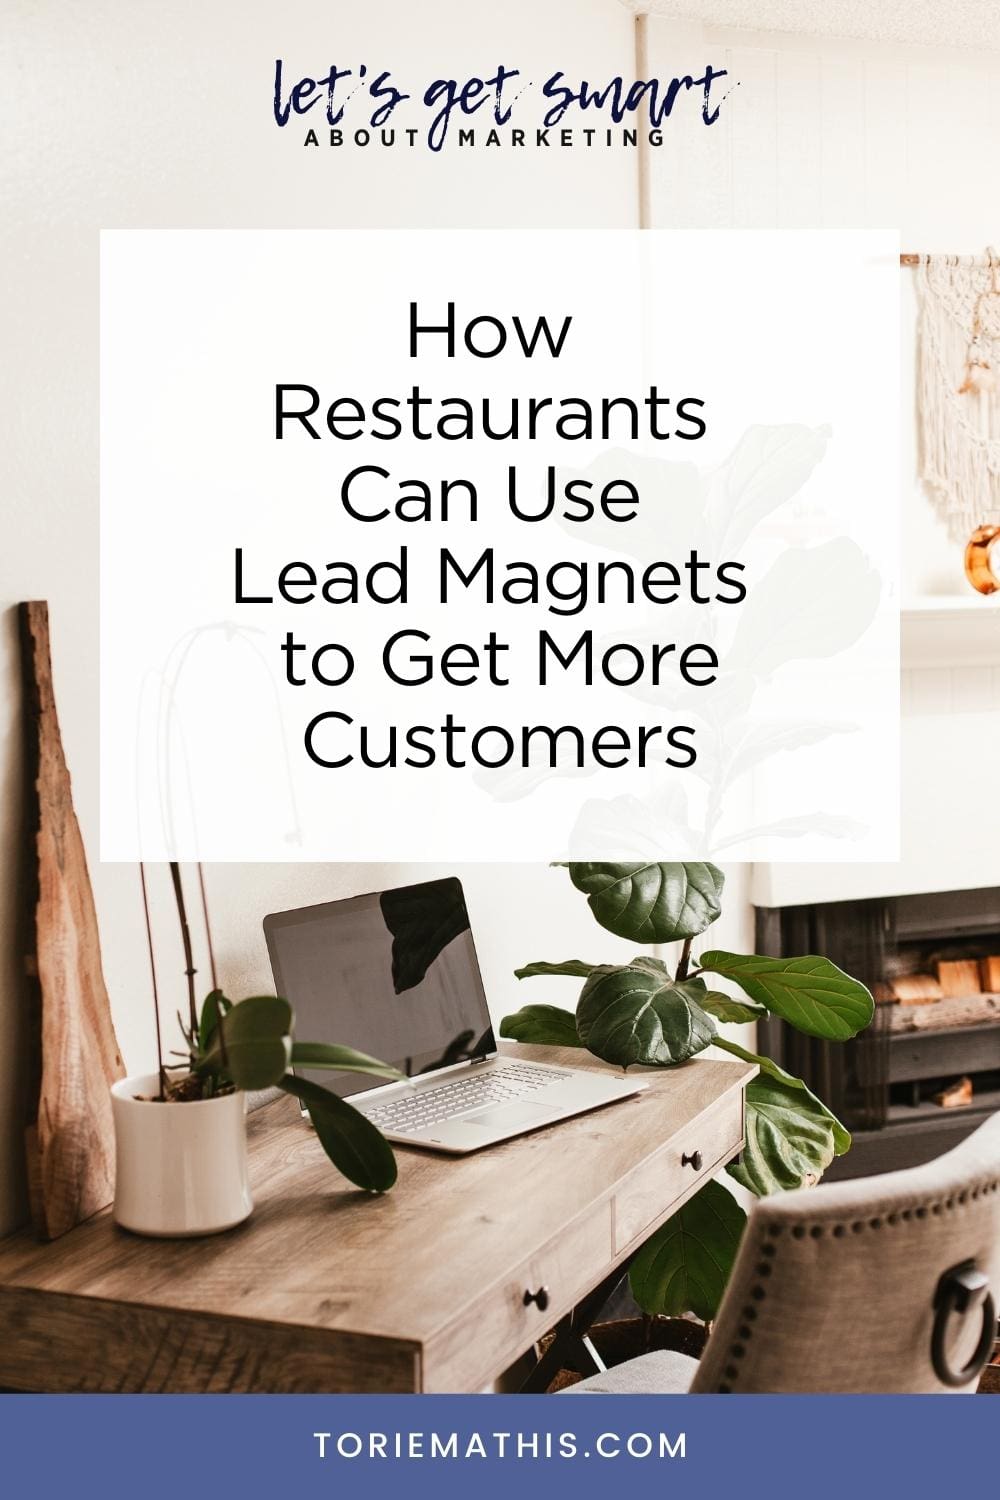 How Restaurants Can Use Lead Magnets to Get More Customers